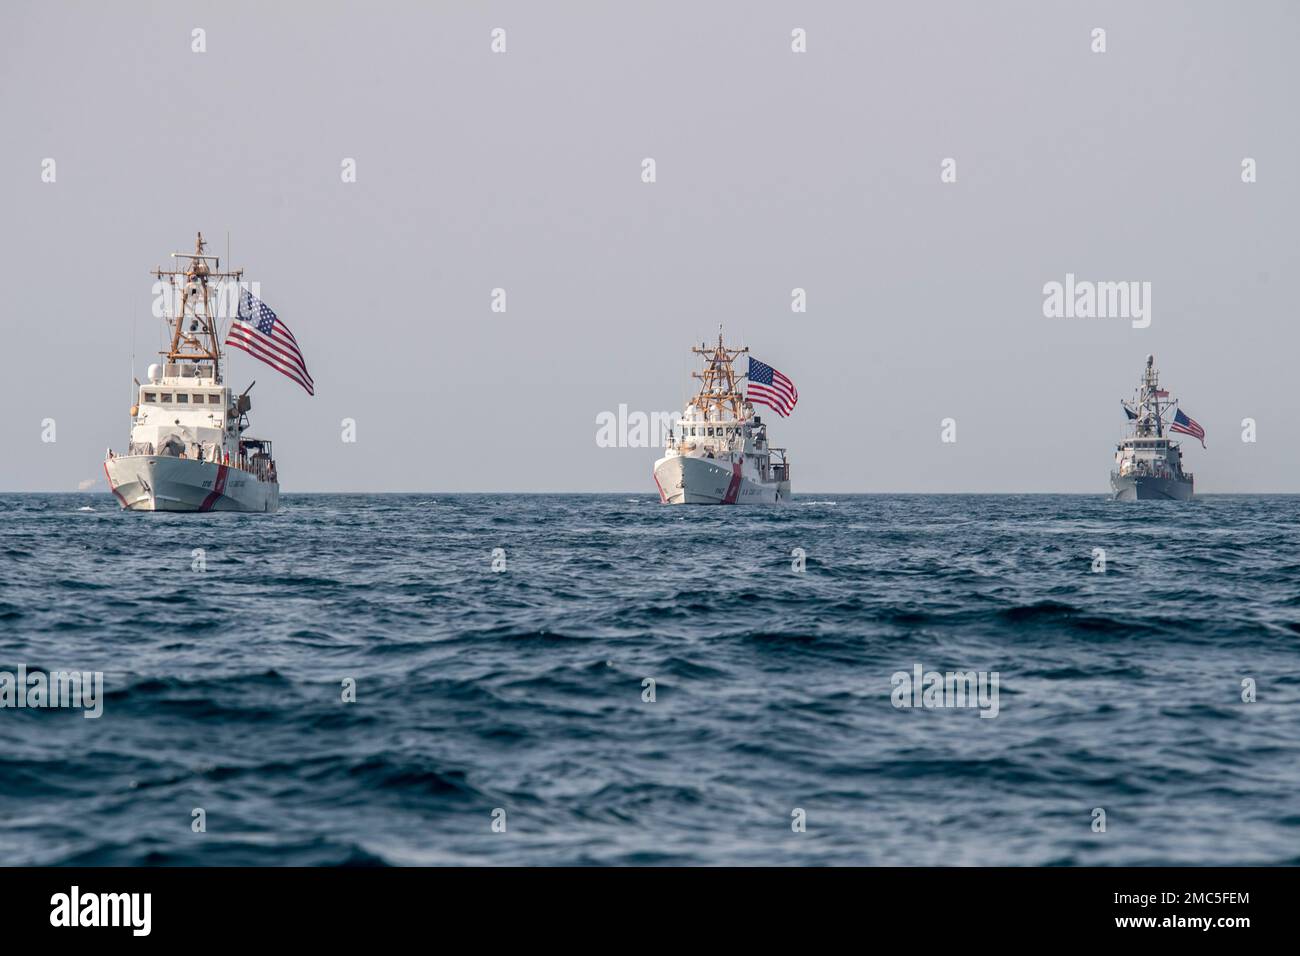 220626-N-NS602-1416 ARABIAN GULF (June 26, 2022) U.S. Coast Guard cutters USCGC Baranof (WPB 1318) and USCGC Robert Goldman (WPC 1142) and coastal patrol ship USS Thunderbolt (PC 12) sail in the Arabian Gulf, June 26. U.S. naval forces regularly operate across the Middle East region to help ensure security and stability. Stock Photo